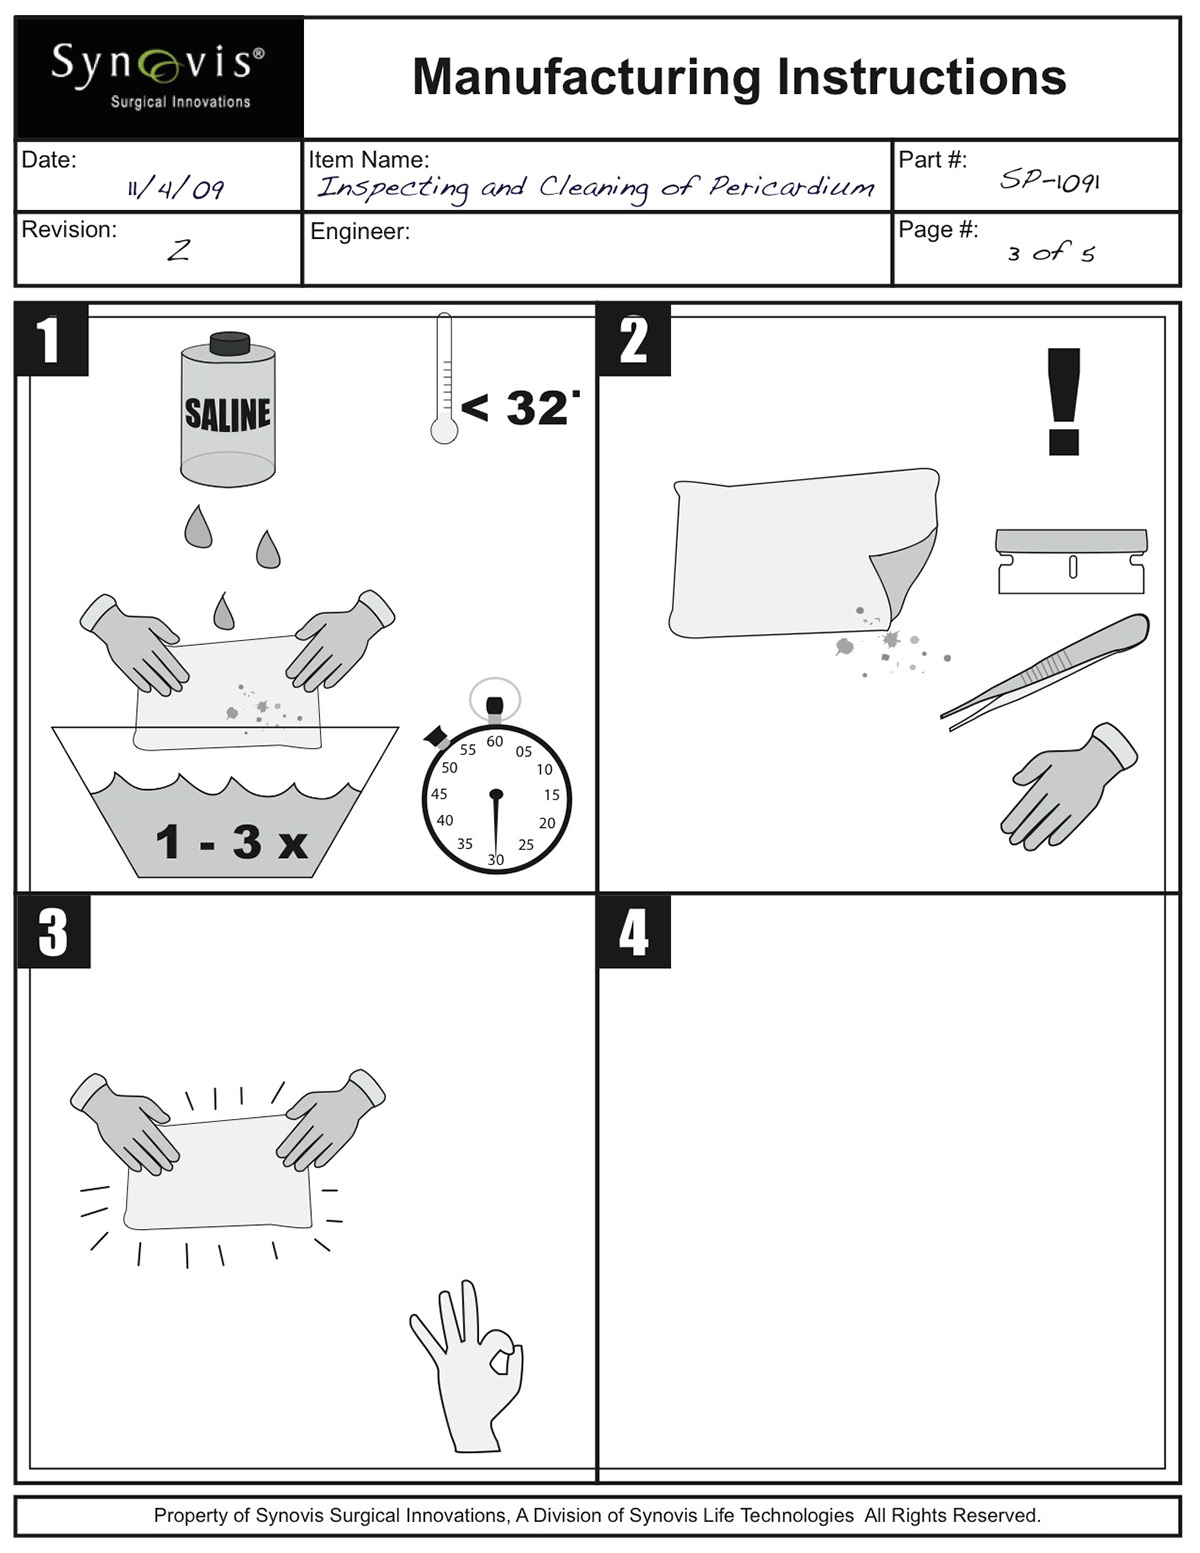 Synovis technical illustrations instructions Visual Aid process